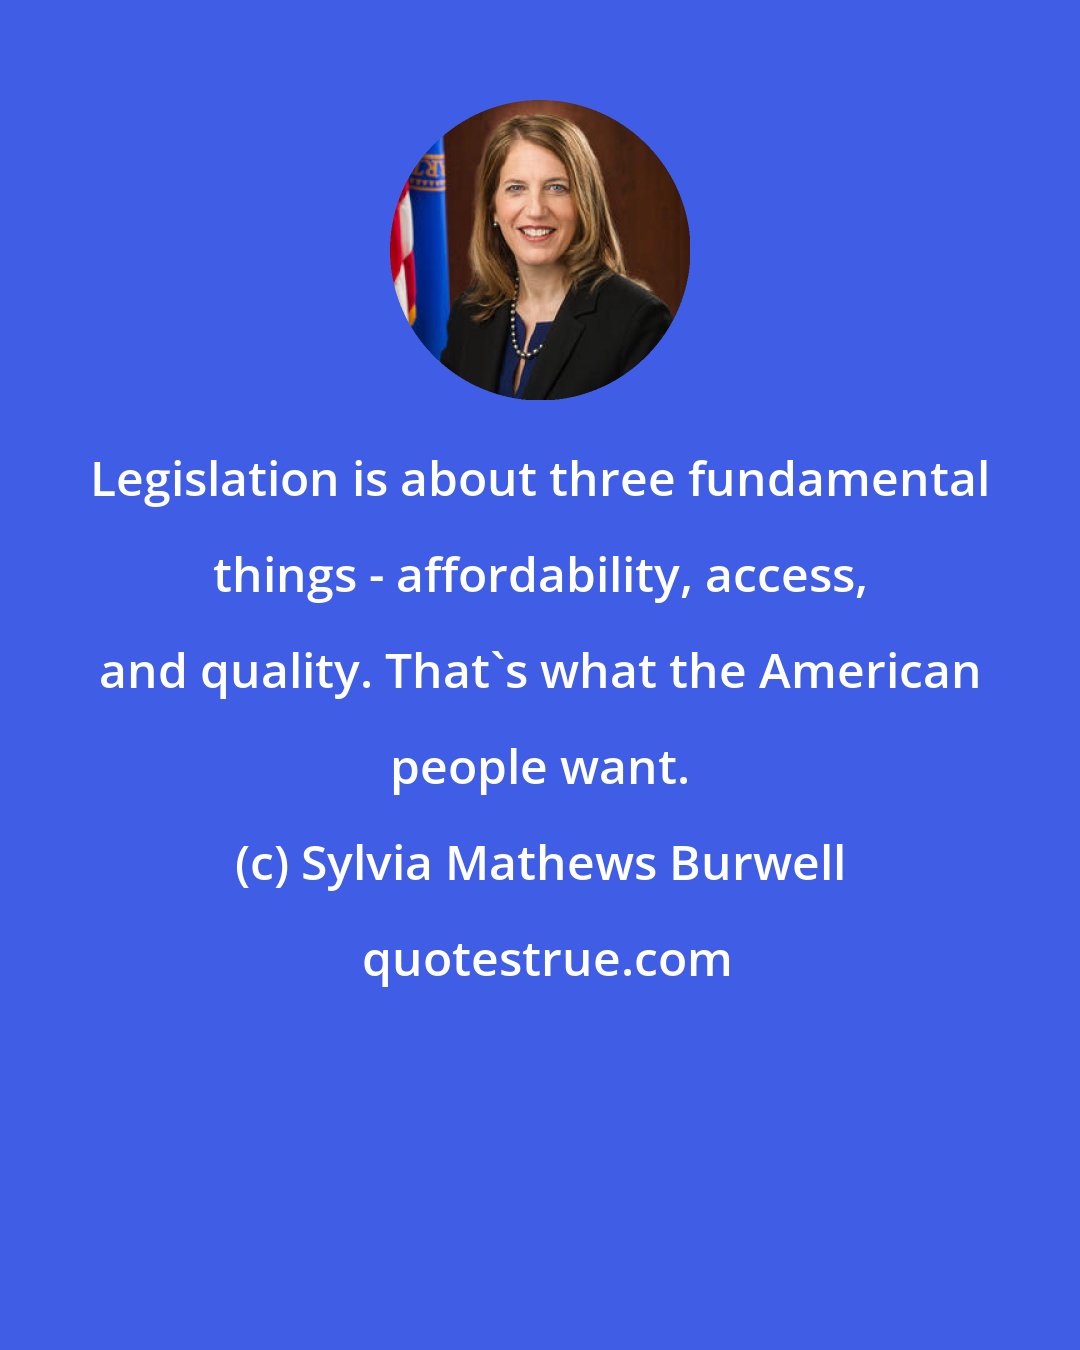 Sylvia Mathews Burwell: Legislation is about three fundamental things - affordability, access, and quality. That's what the American people want.